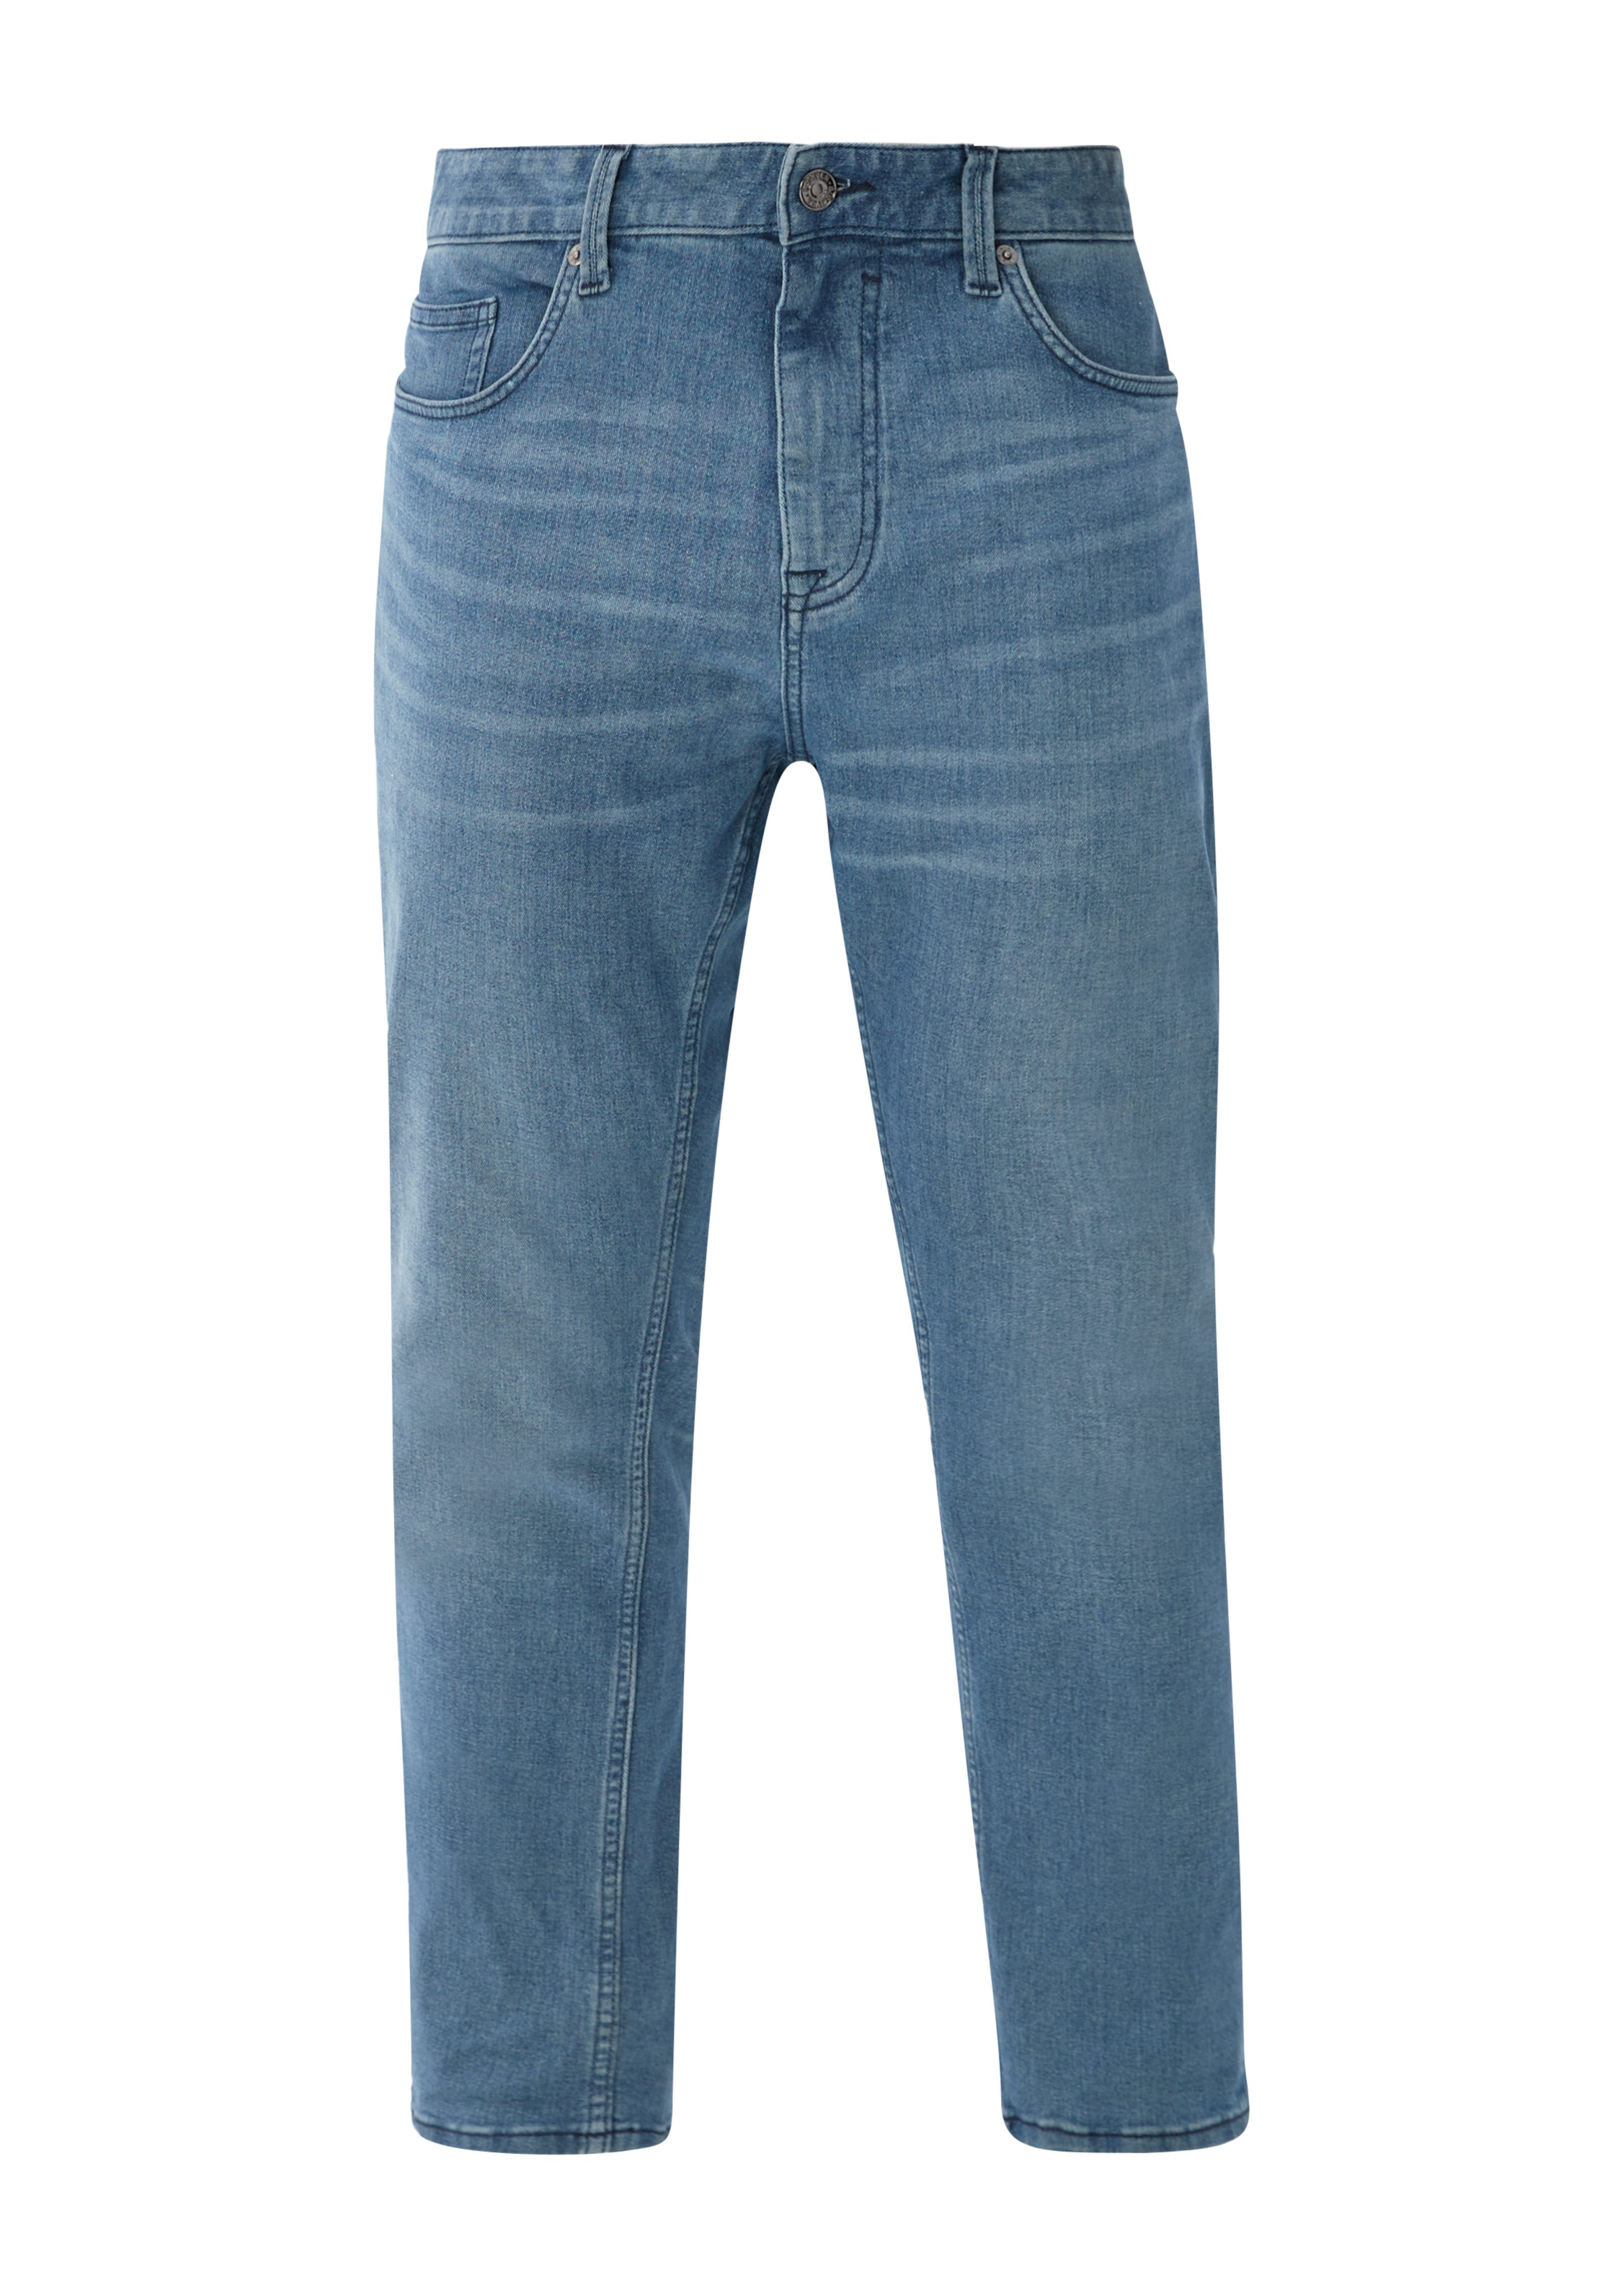 Destroyes Jeans Rise Mid hellblau / Leg Casby Stoffhose Straight / Relaxed s.Oliver Fit /